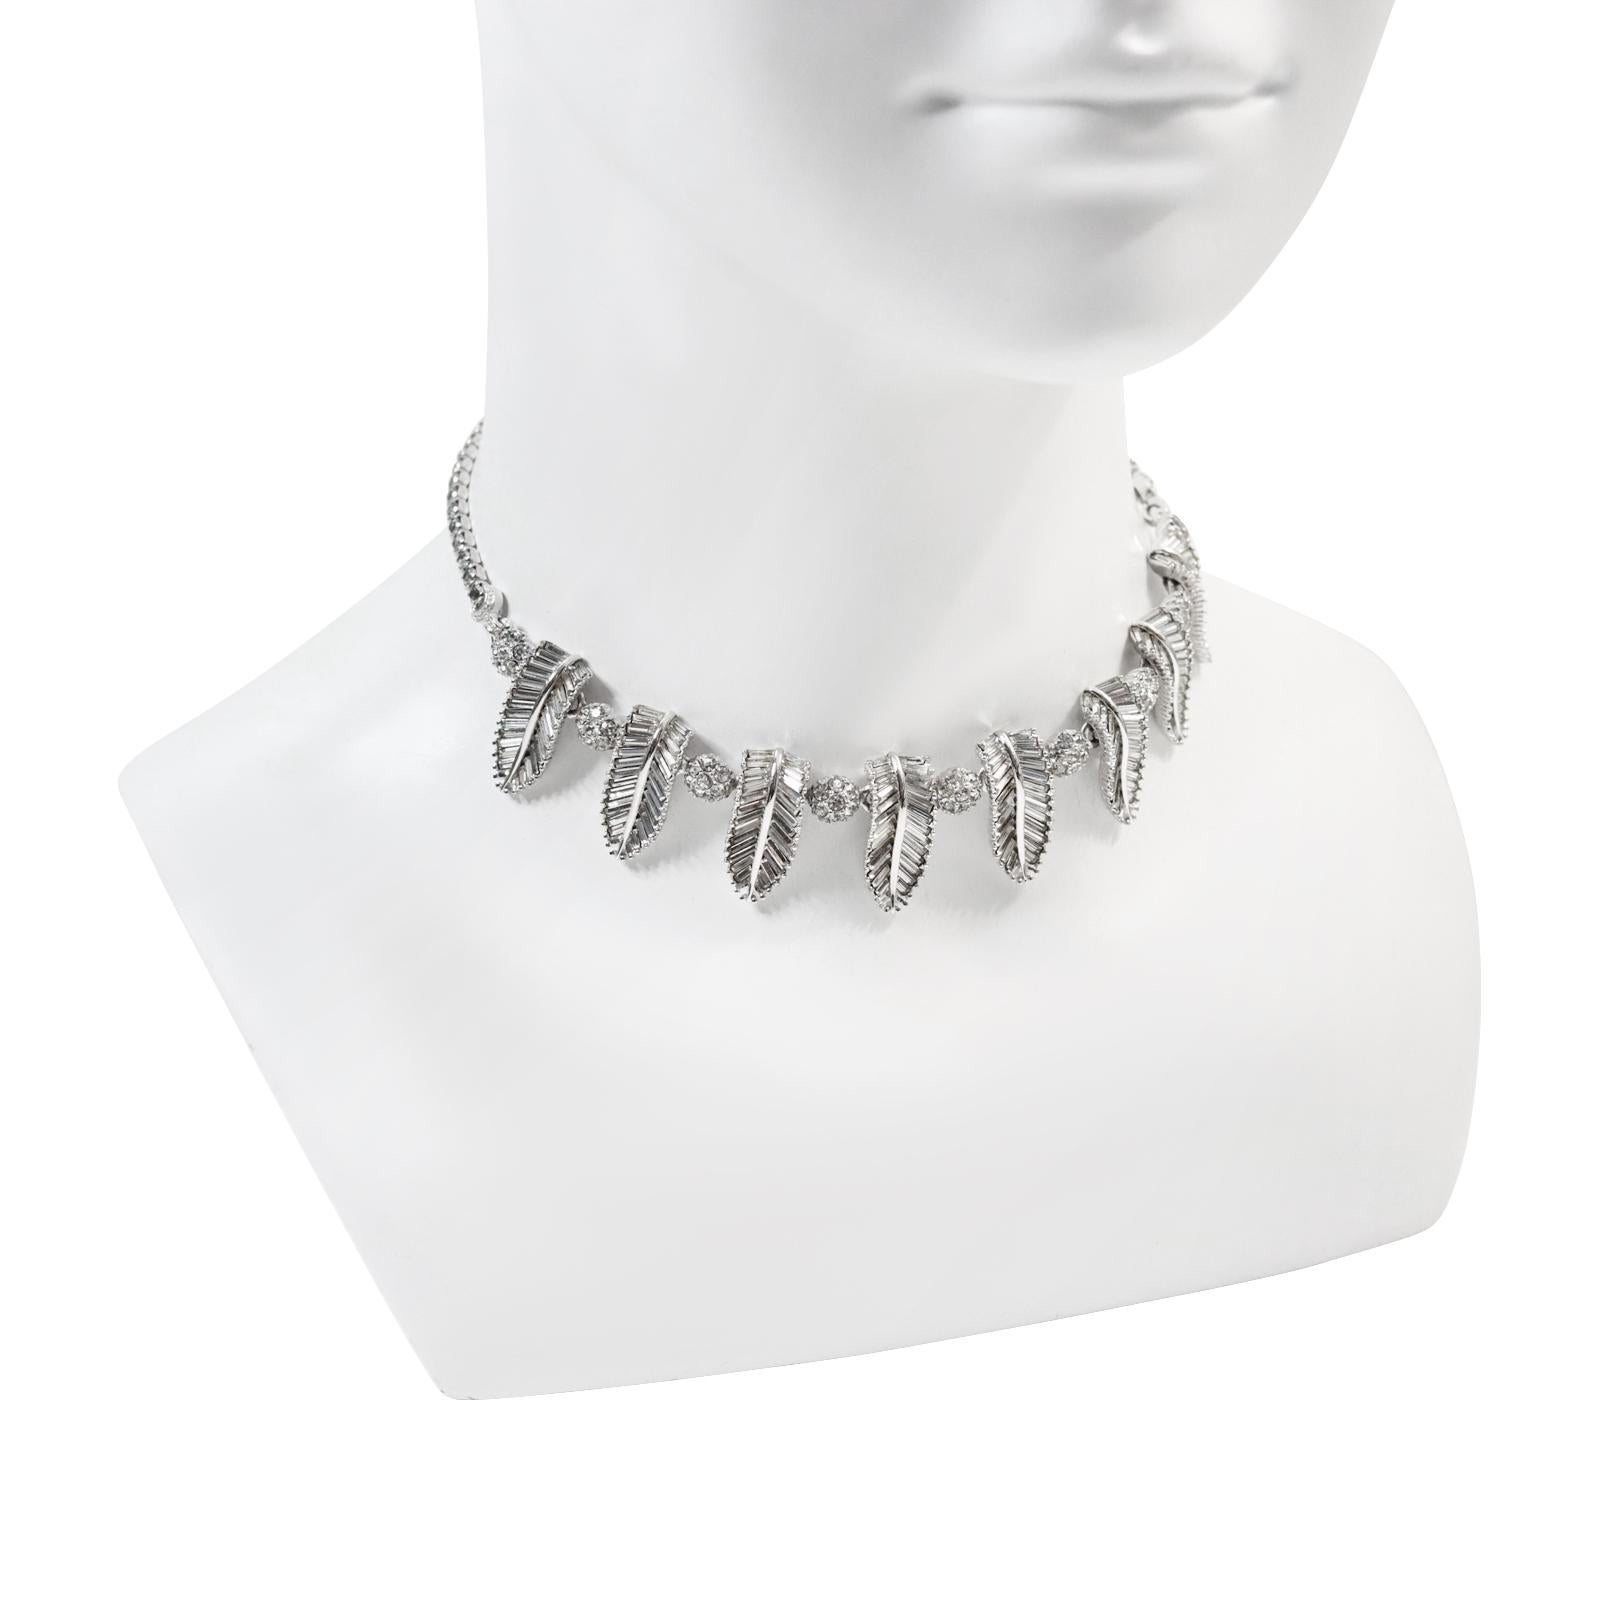 Vintage Pennino Baguette and Pave Art Deco Choker Circa 1960s For Sale 3